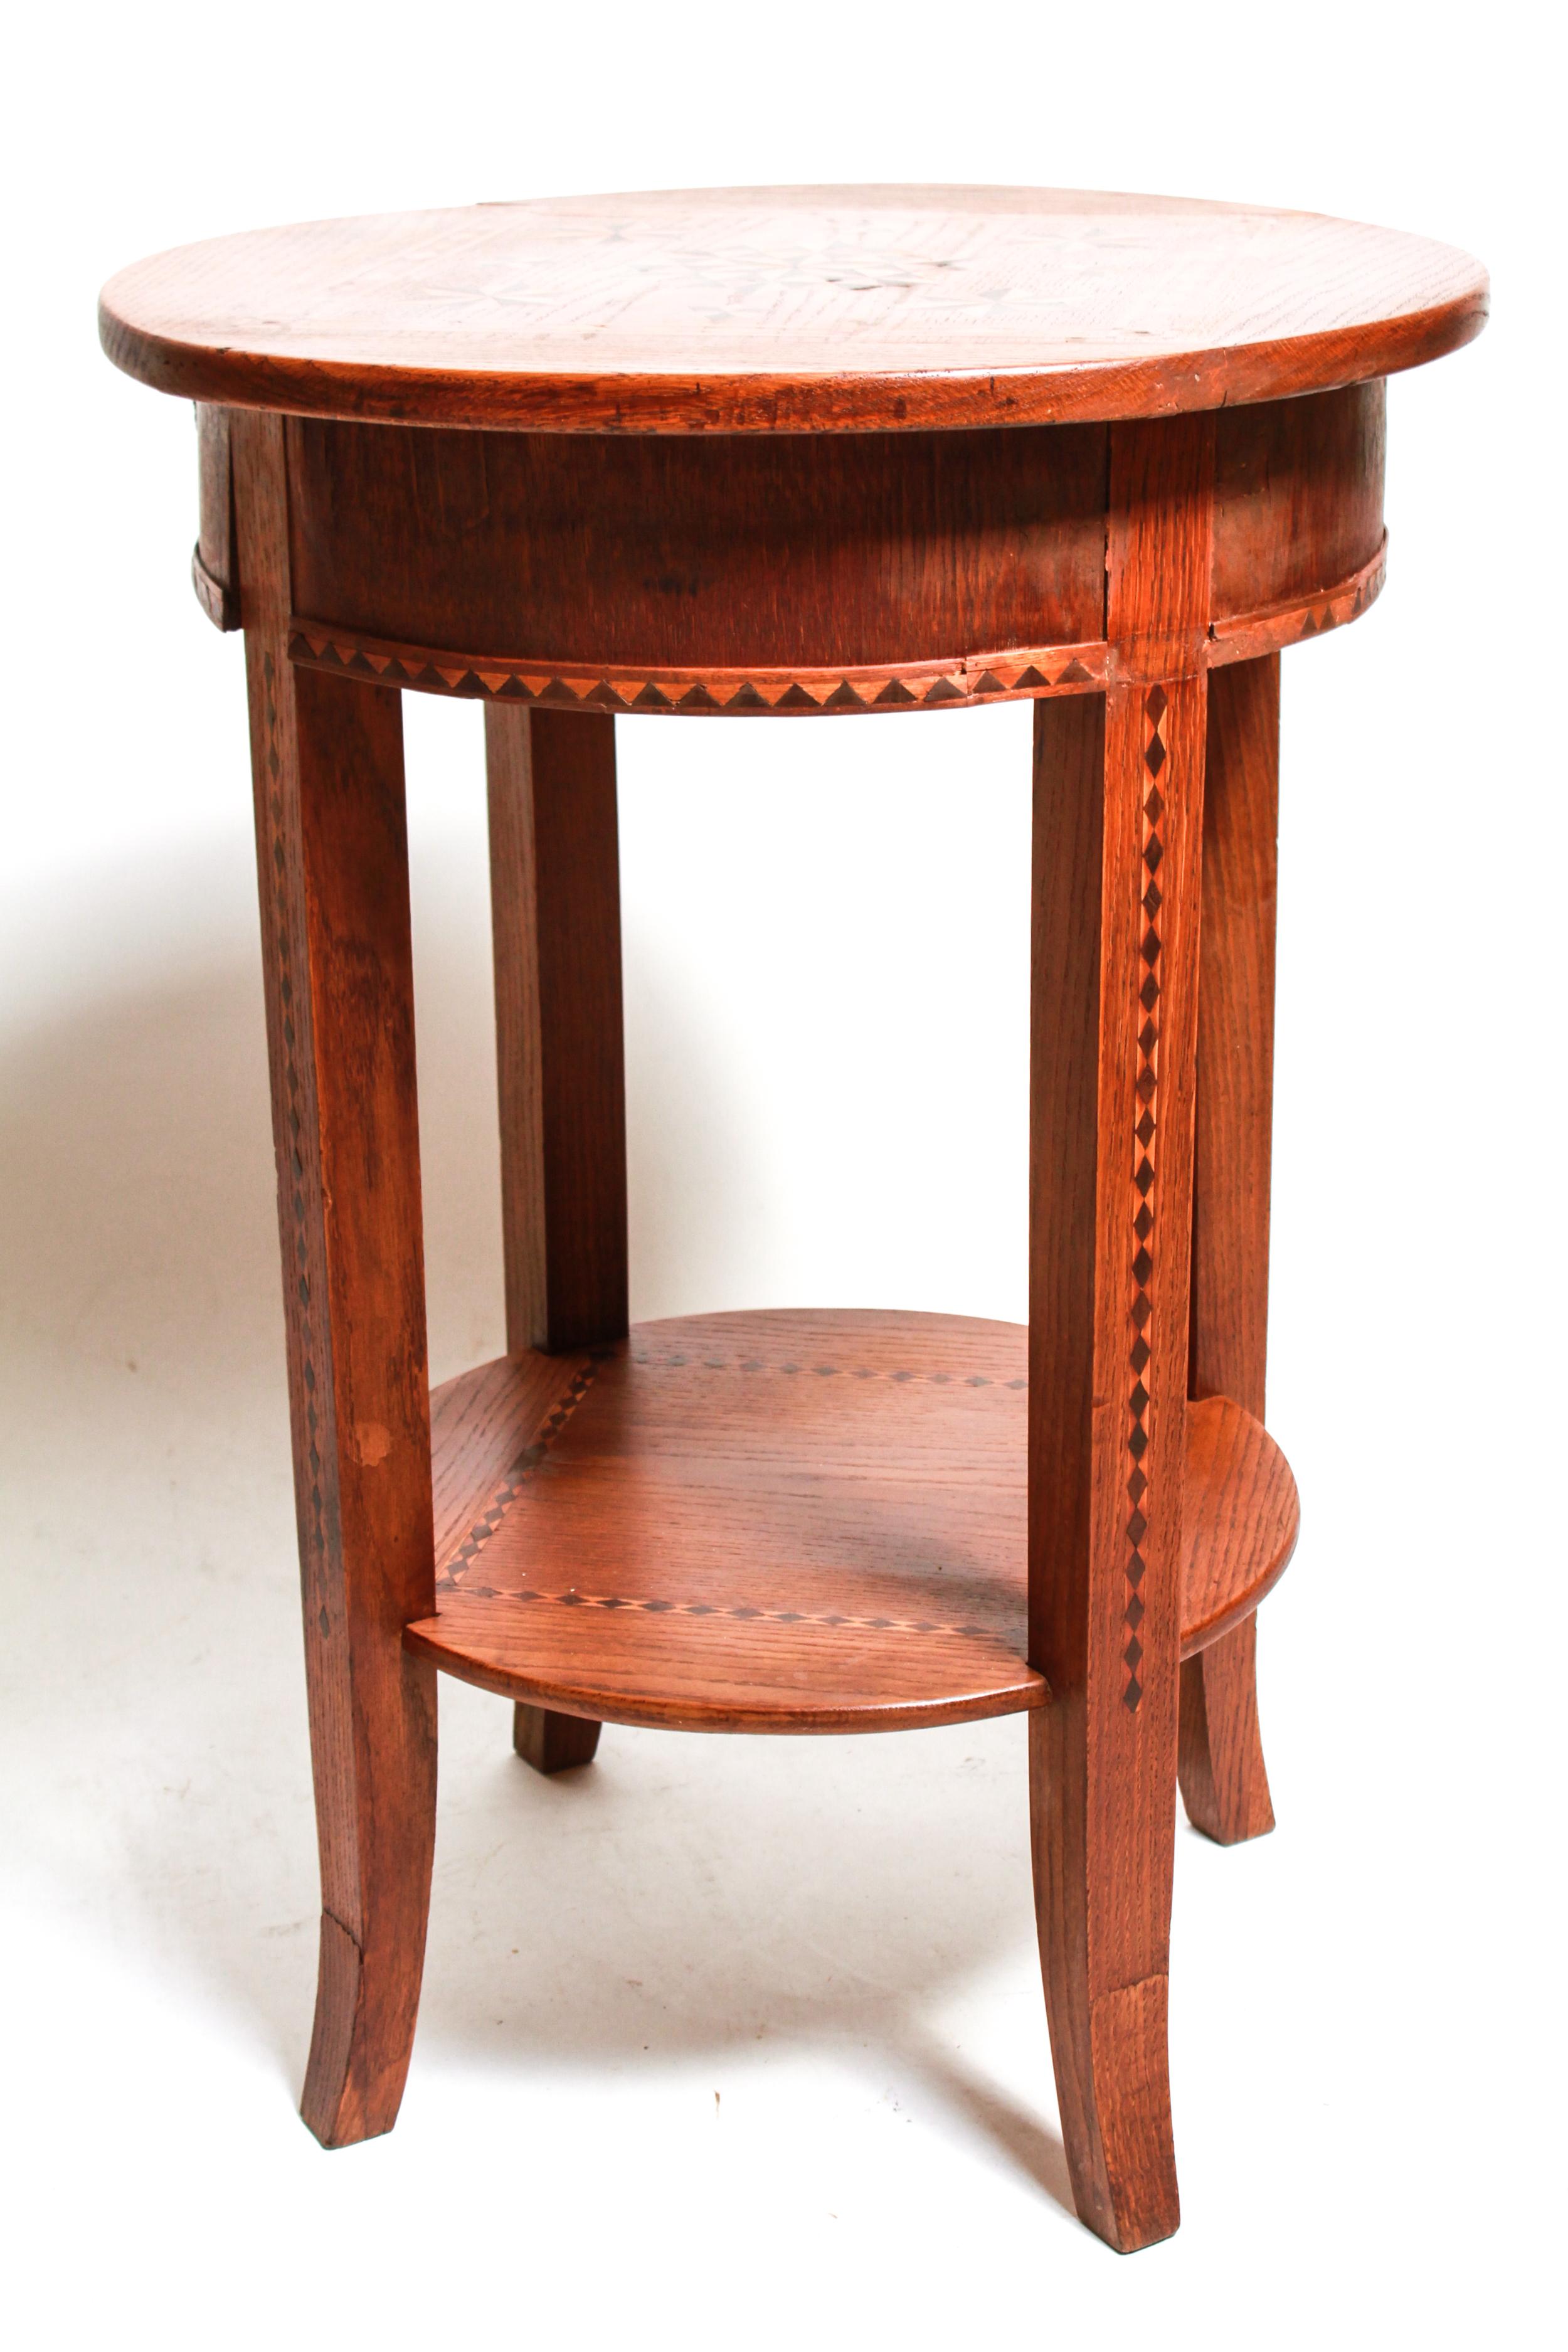 20th Century Swiss Rustic Side Table with Geometric Parquetry